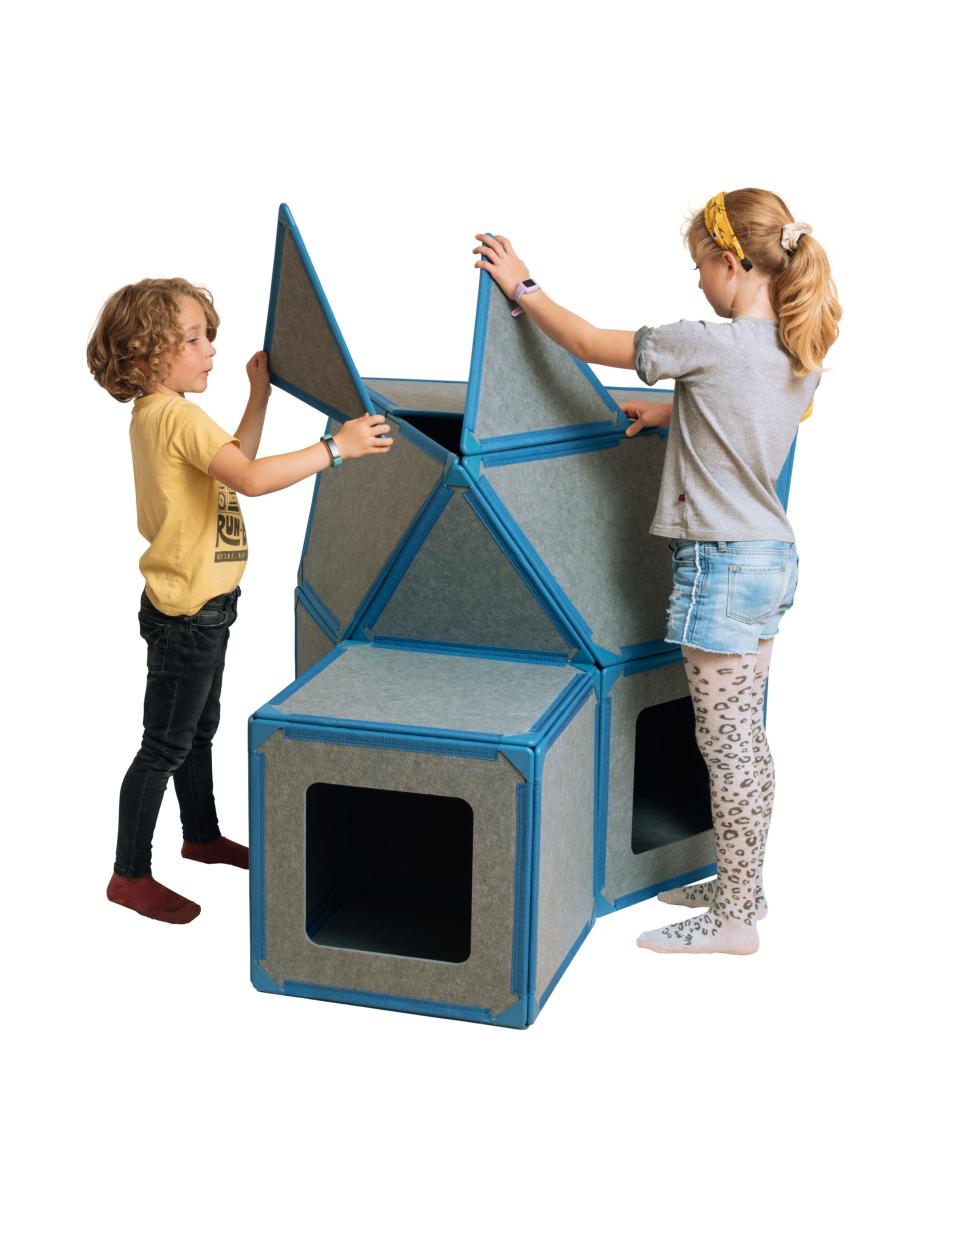 Superspace life-sized modular magnetic play space set